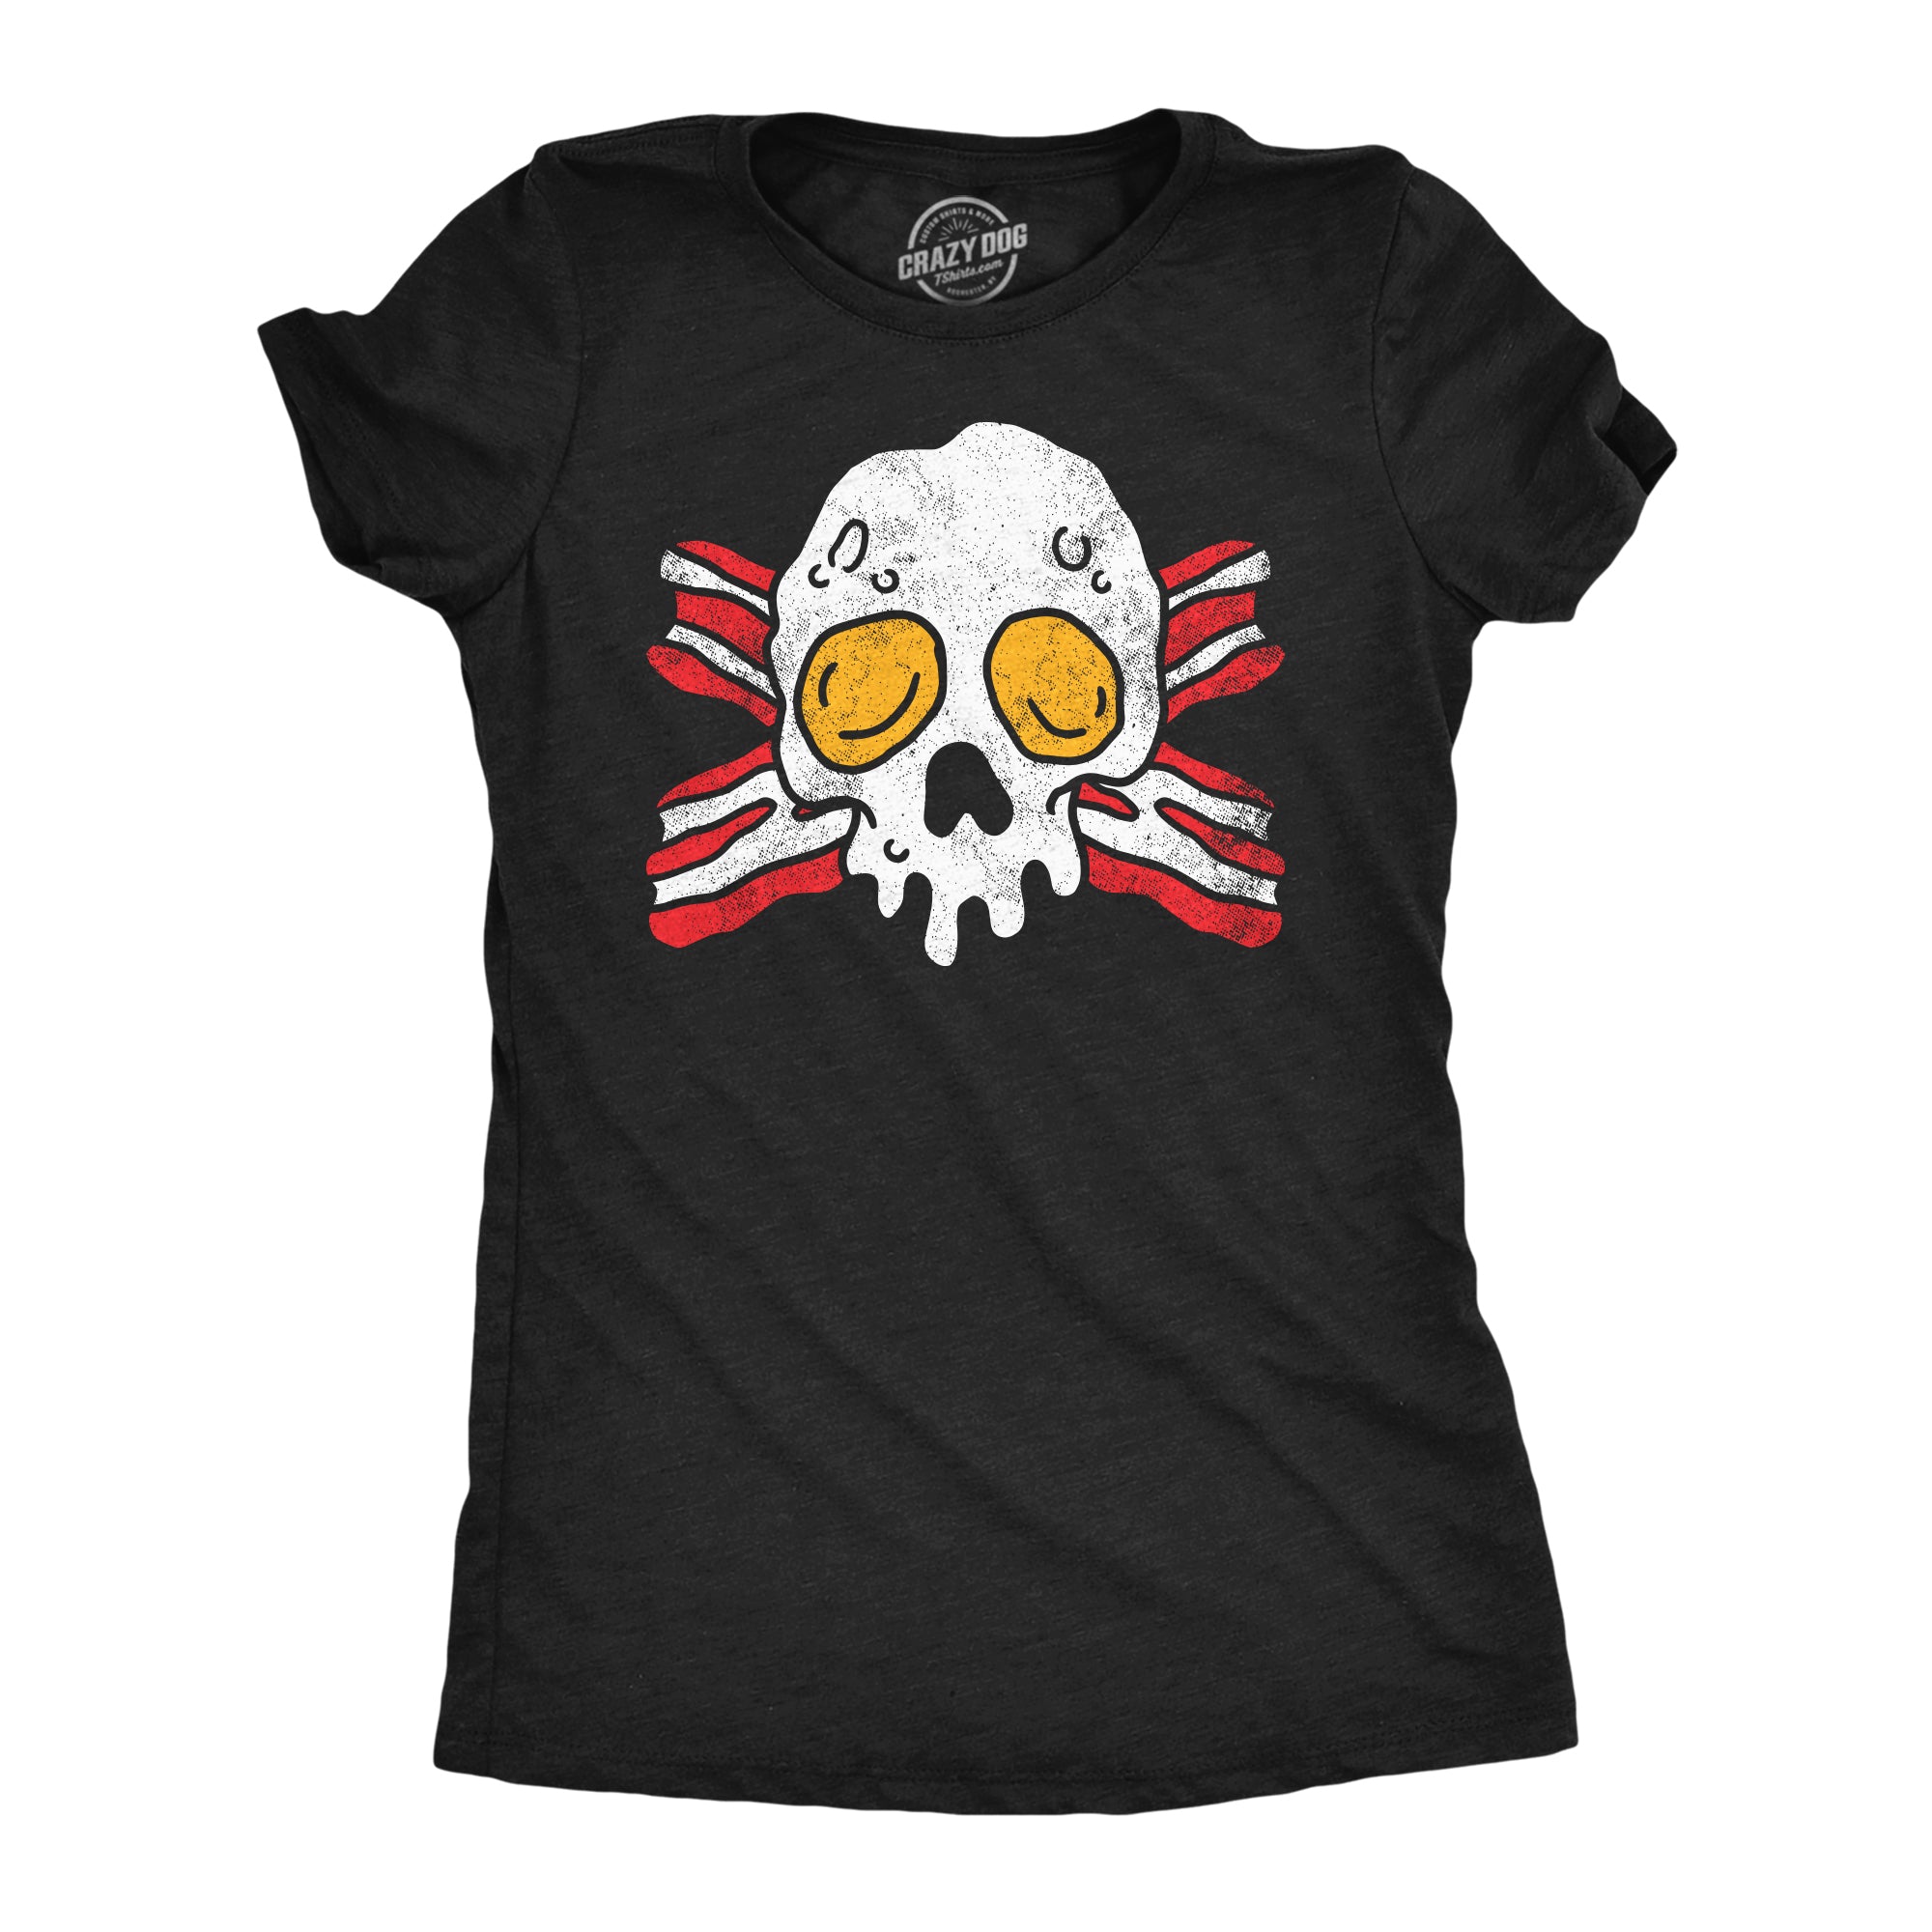 Funny Heather Black - Bacon And Eggs Skull Bacon And Egg Skull Womens T Shirt Nerdy Food sarcastic Tee